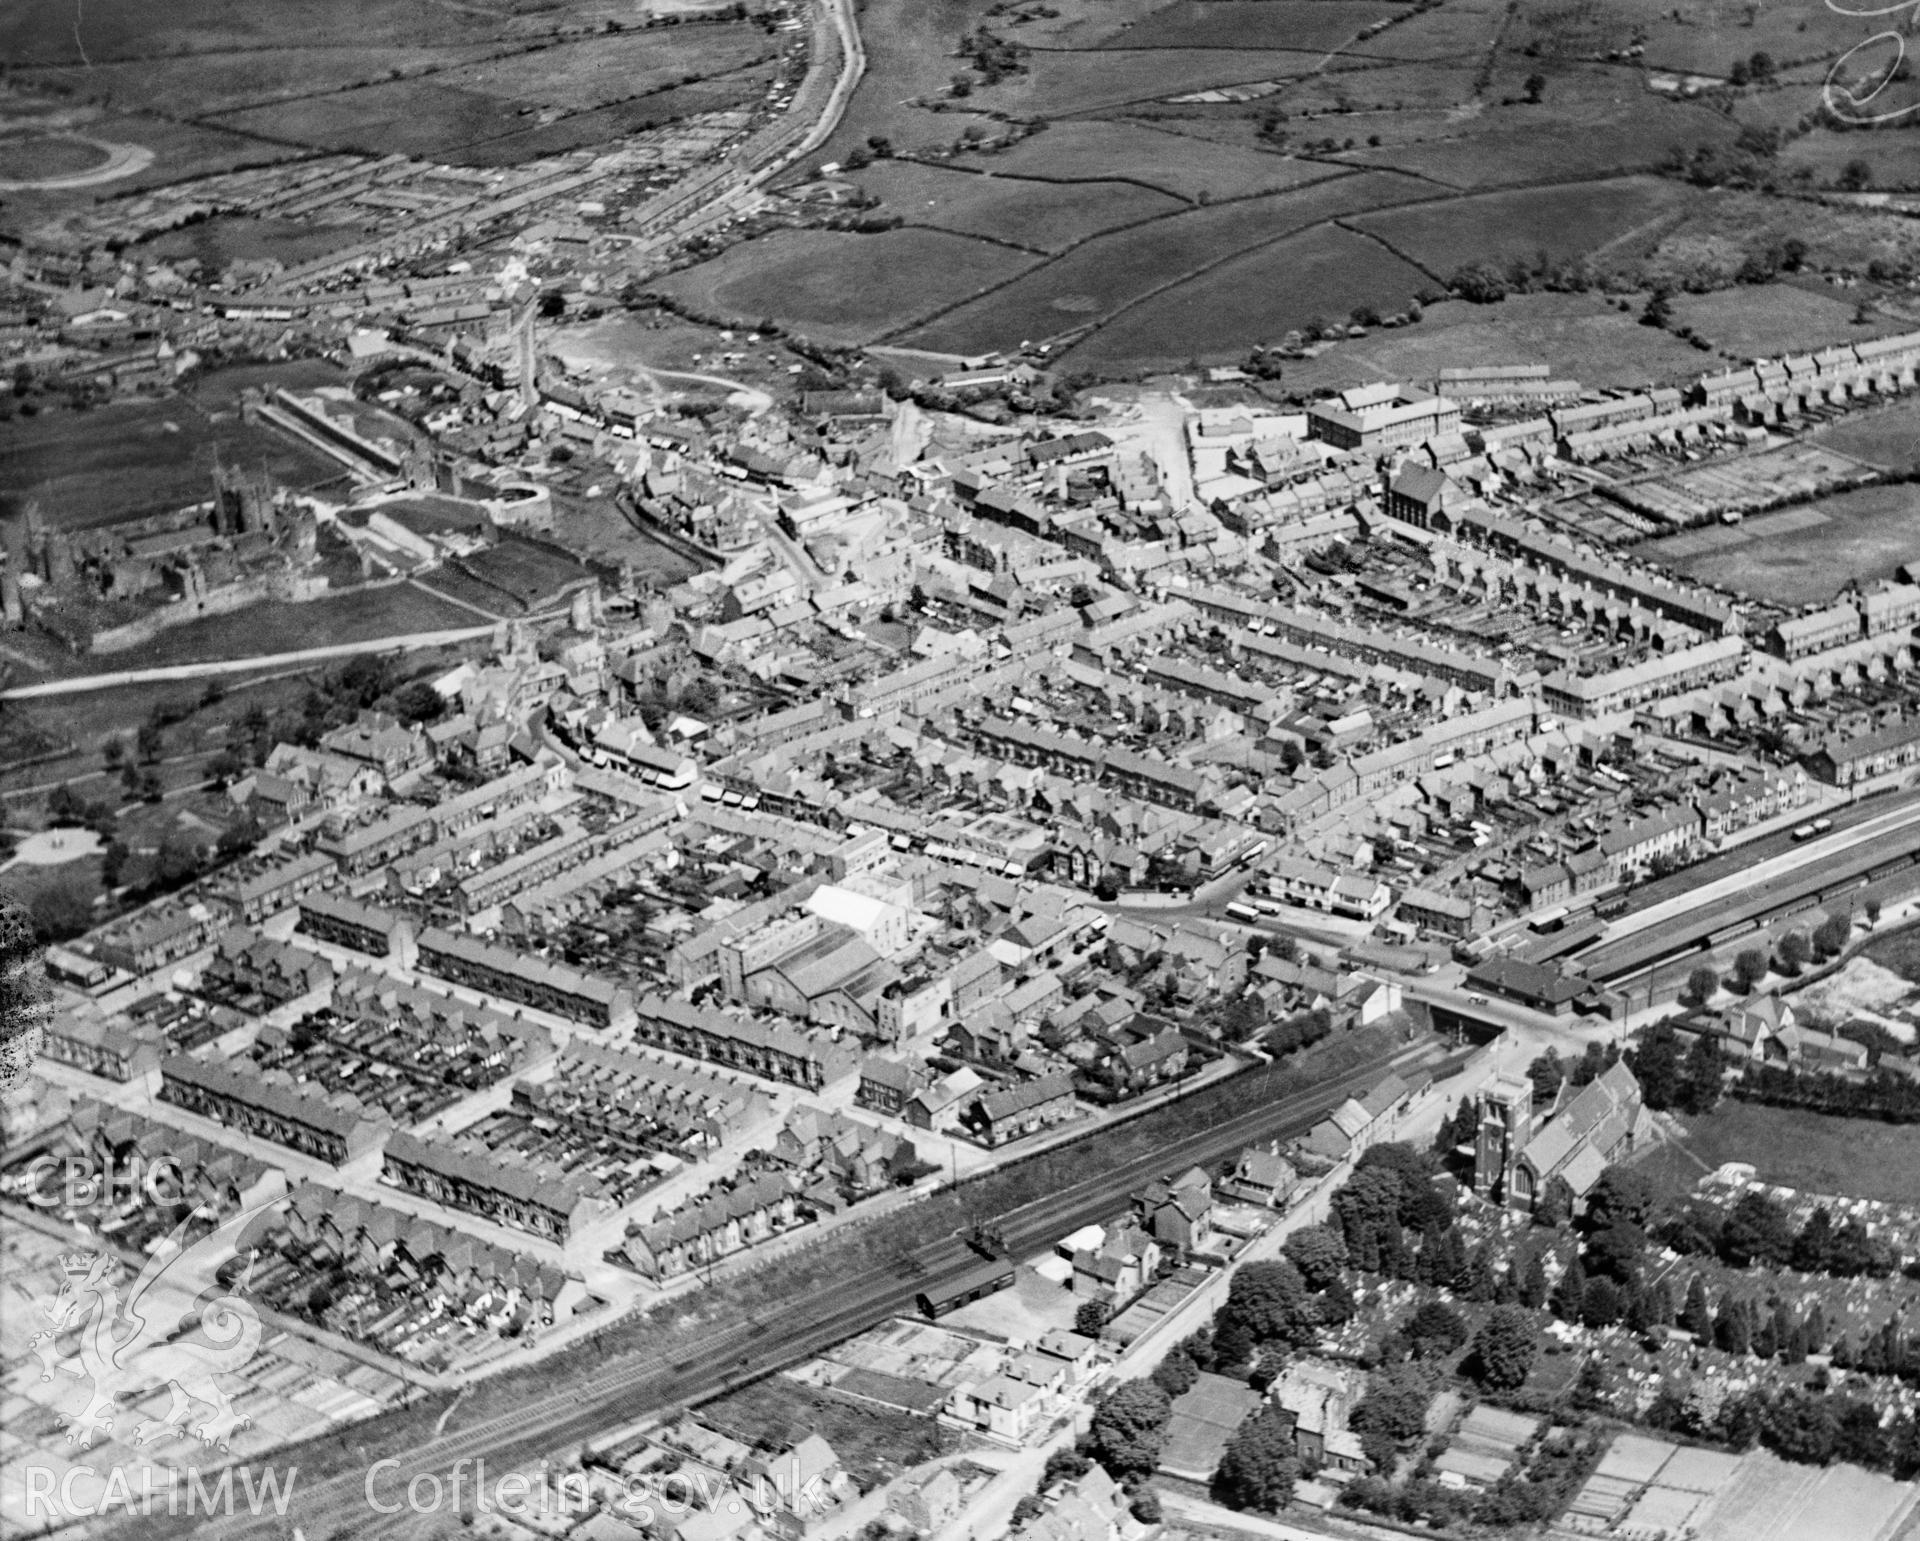 General view of Caerphilly, oblique aerial view. 5?x4? black and white glass plate negative.